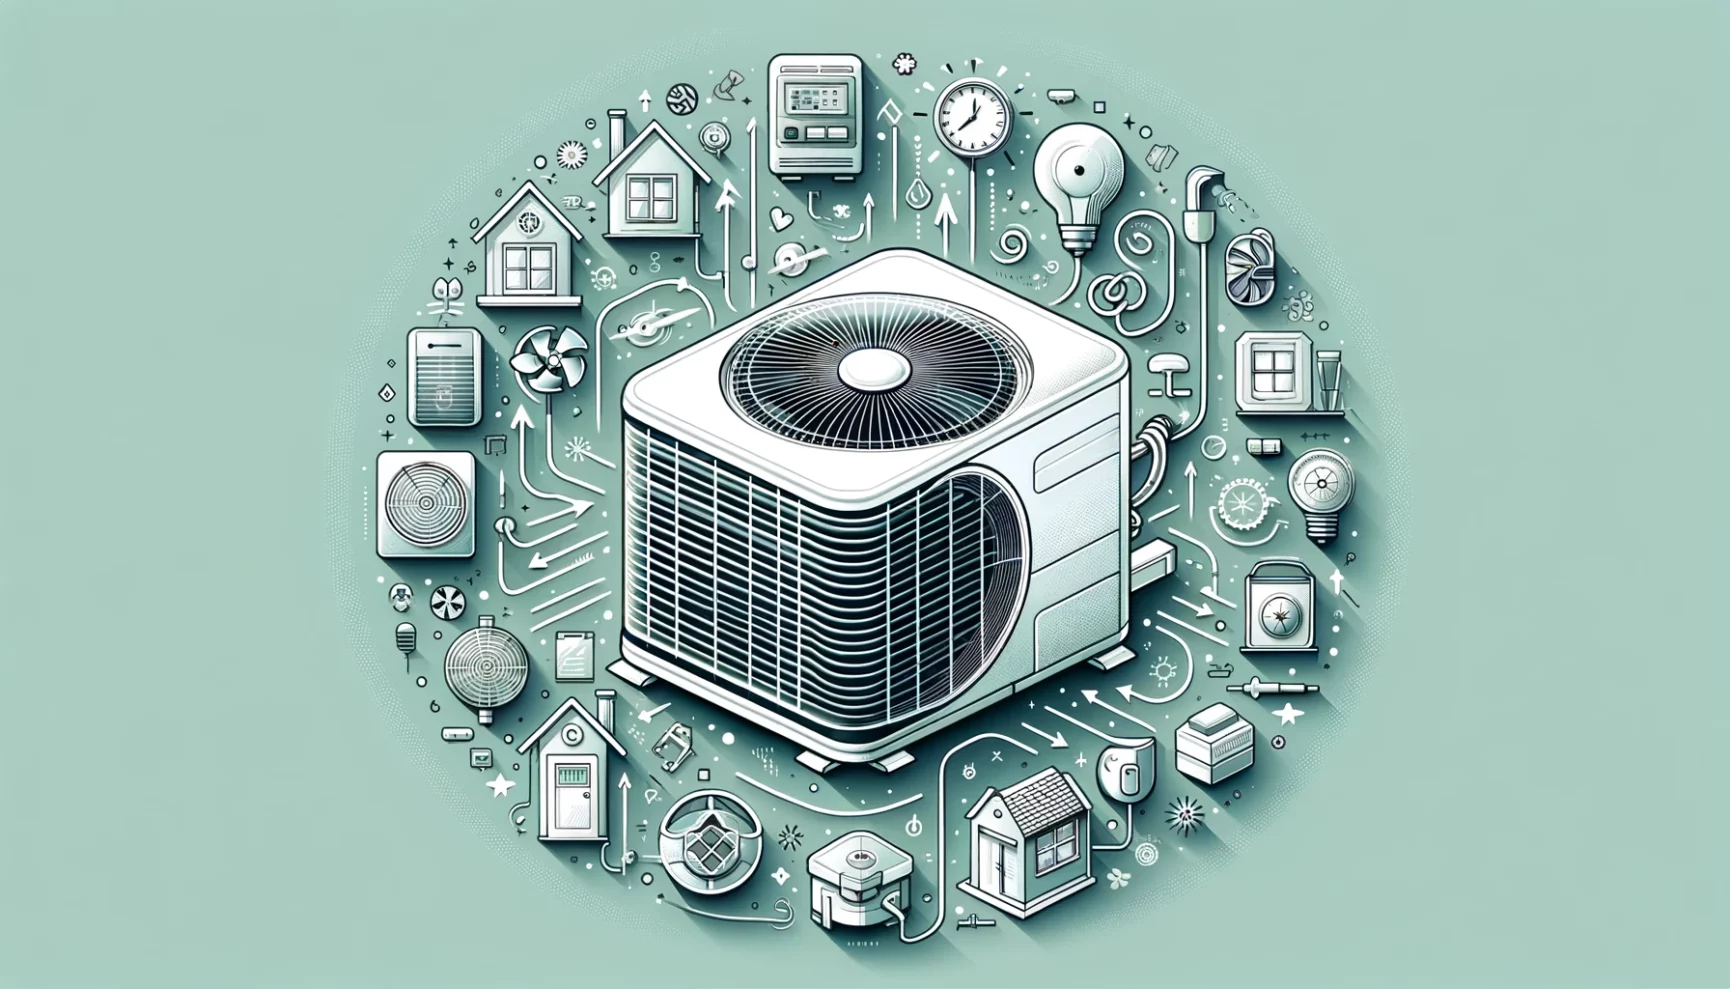 Central air conditioning unit surrounded by various hvac related icons and household elements against a teal background.